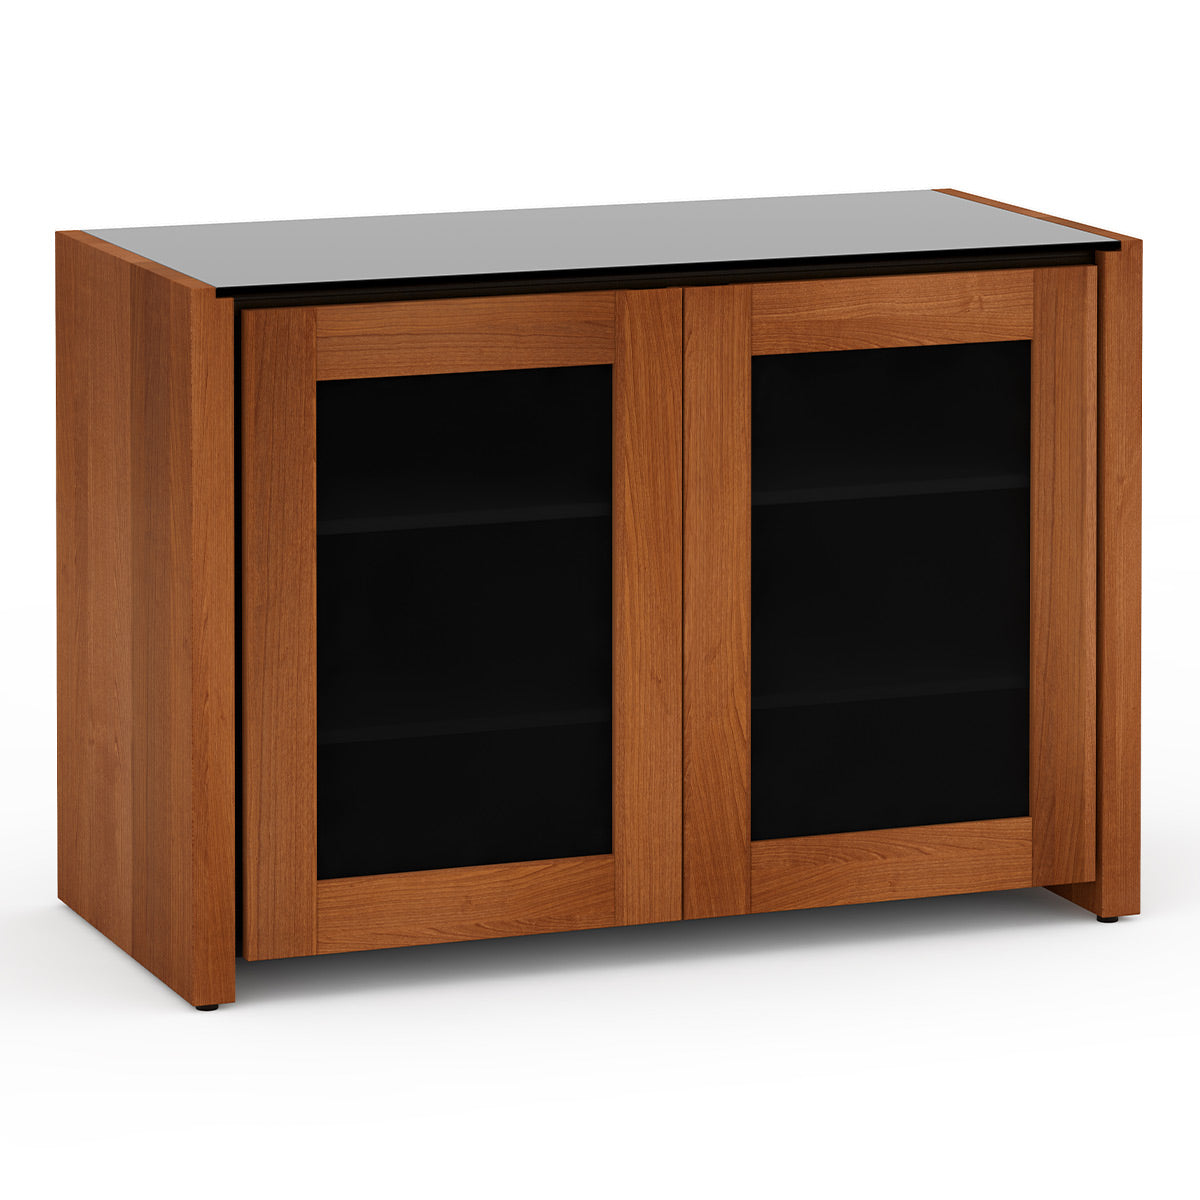 Salamander Chameleon Collection Corsica 323 Twin AV Cabinet (Thick Cherry with Black Glass Top)